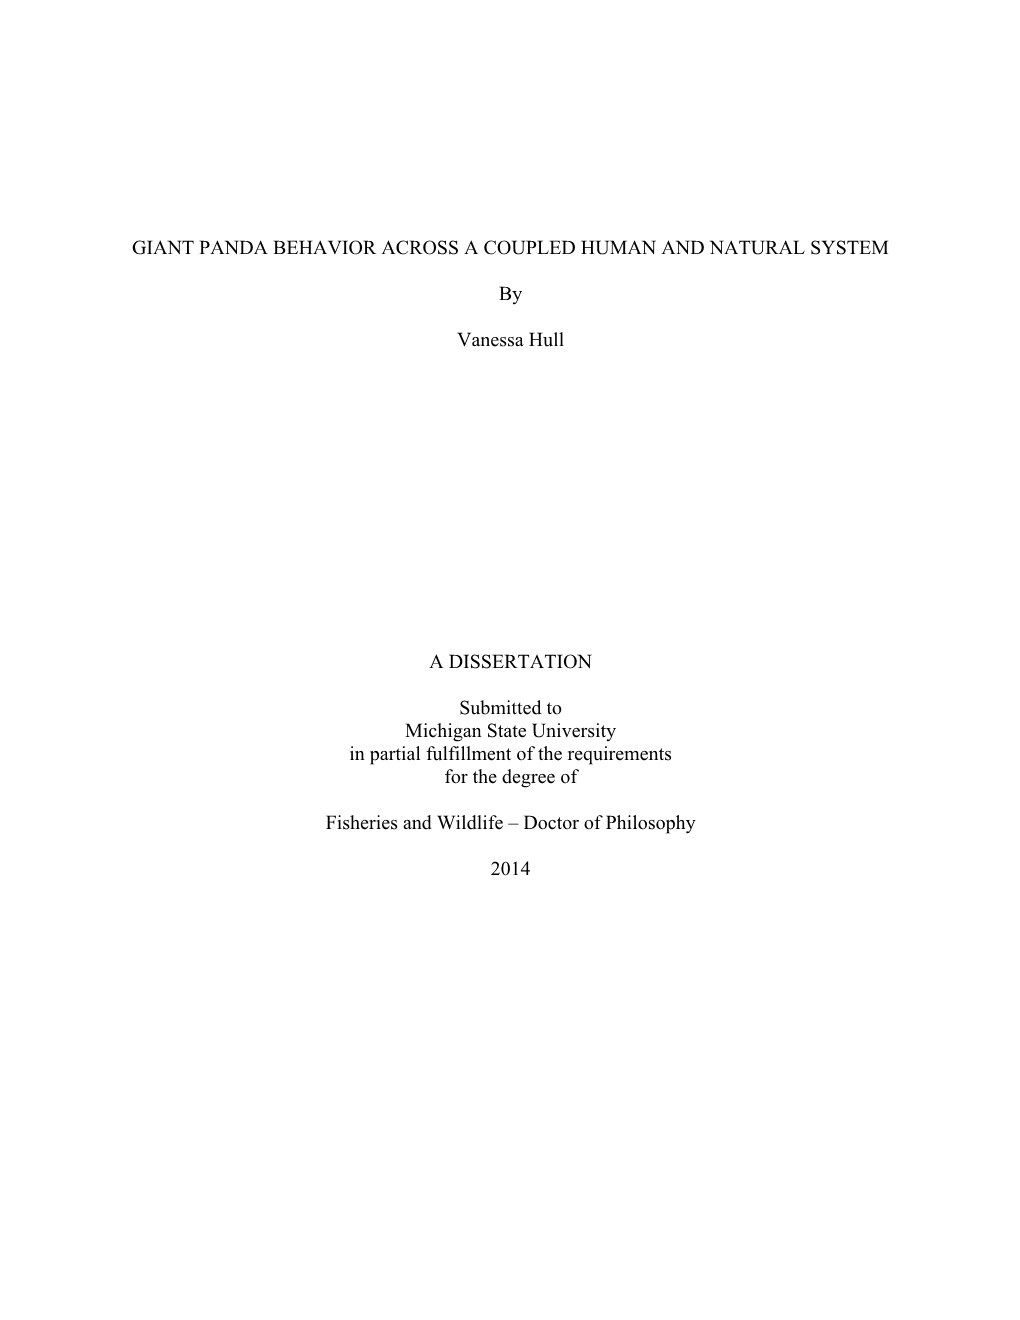 GIANT PANDA BEHAVIOR ACROSS a COUPLED HUMAN and NATURAL SYSTEM by Vanessa Hull a DISSERTATION Submitted to Michigan State Univer